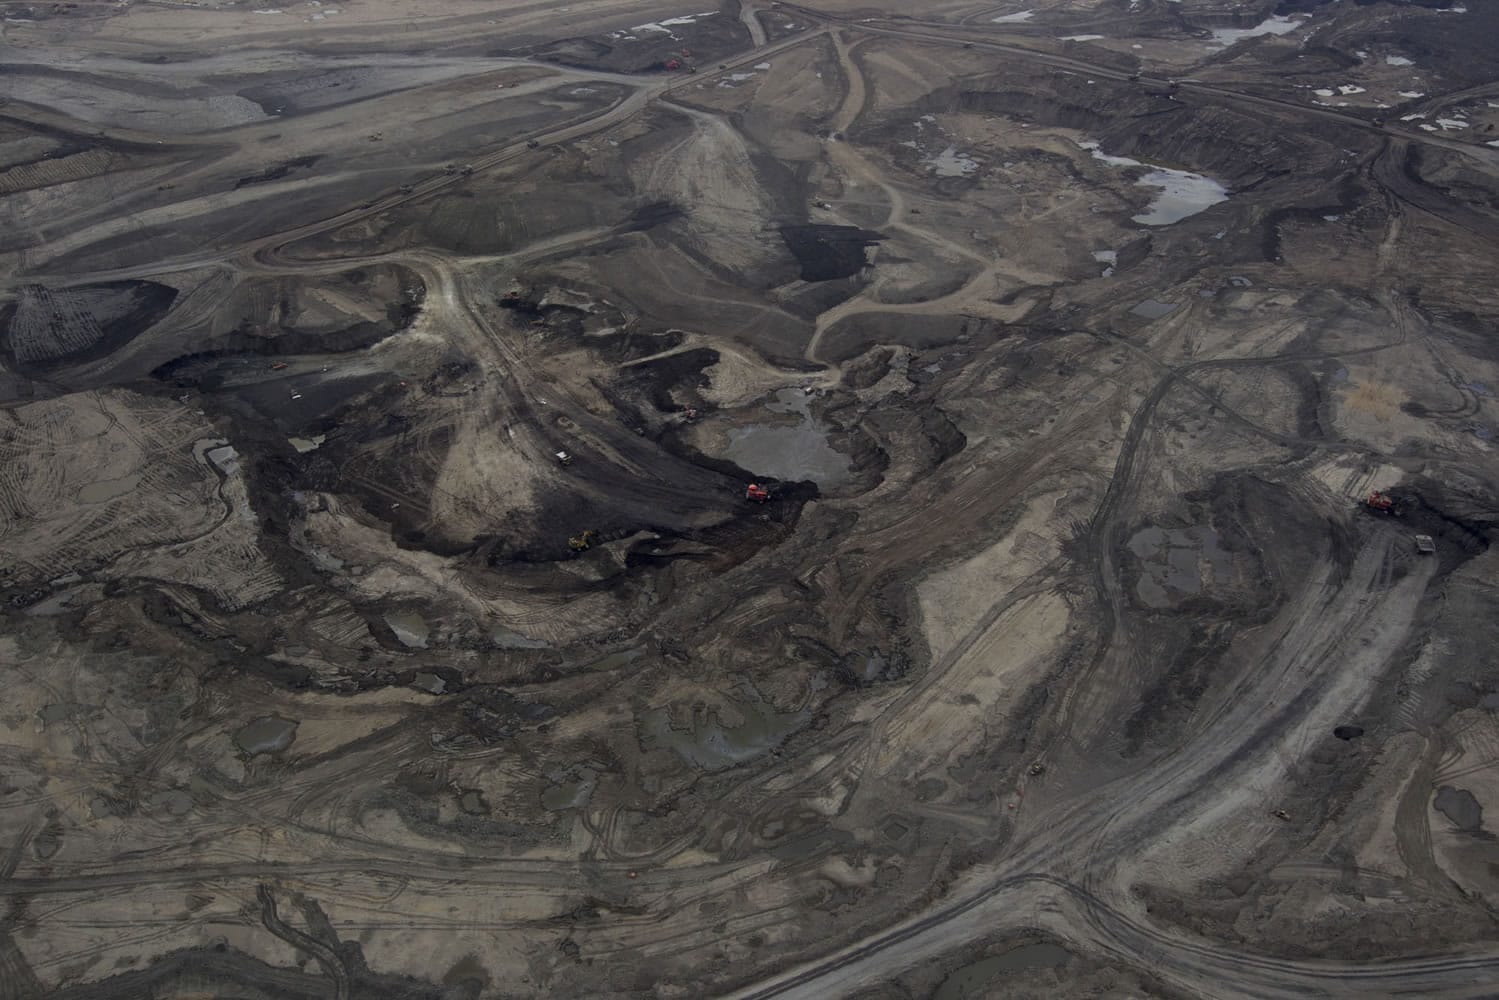 Oil is mined at a Syncrude Canada site near Fort McMurray, Alberta, Canada, in August.